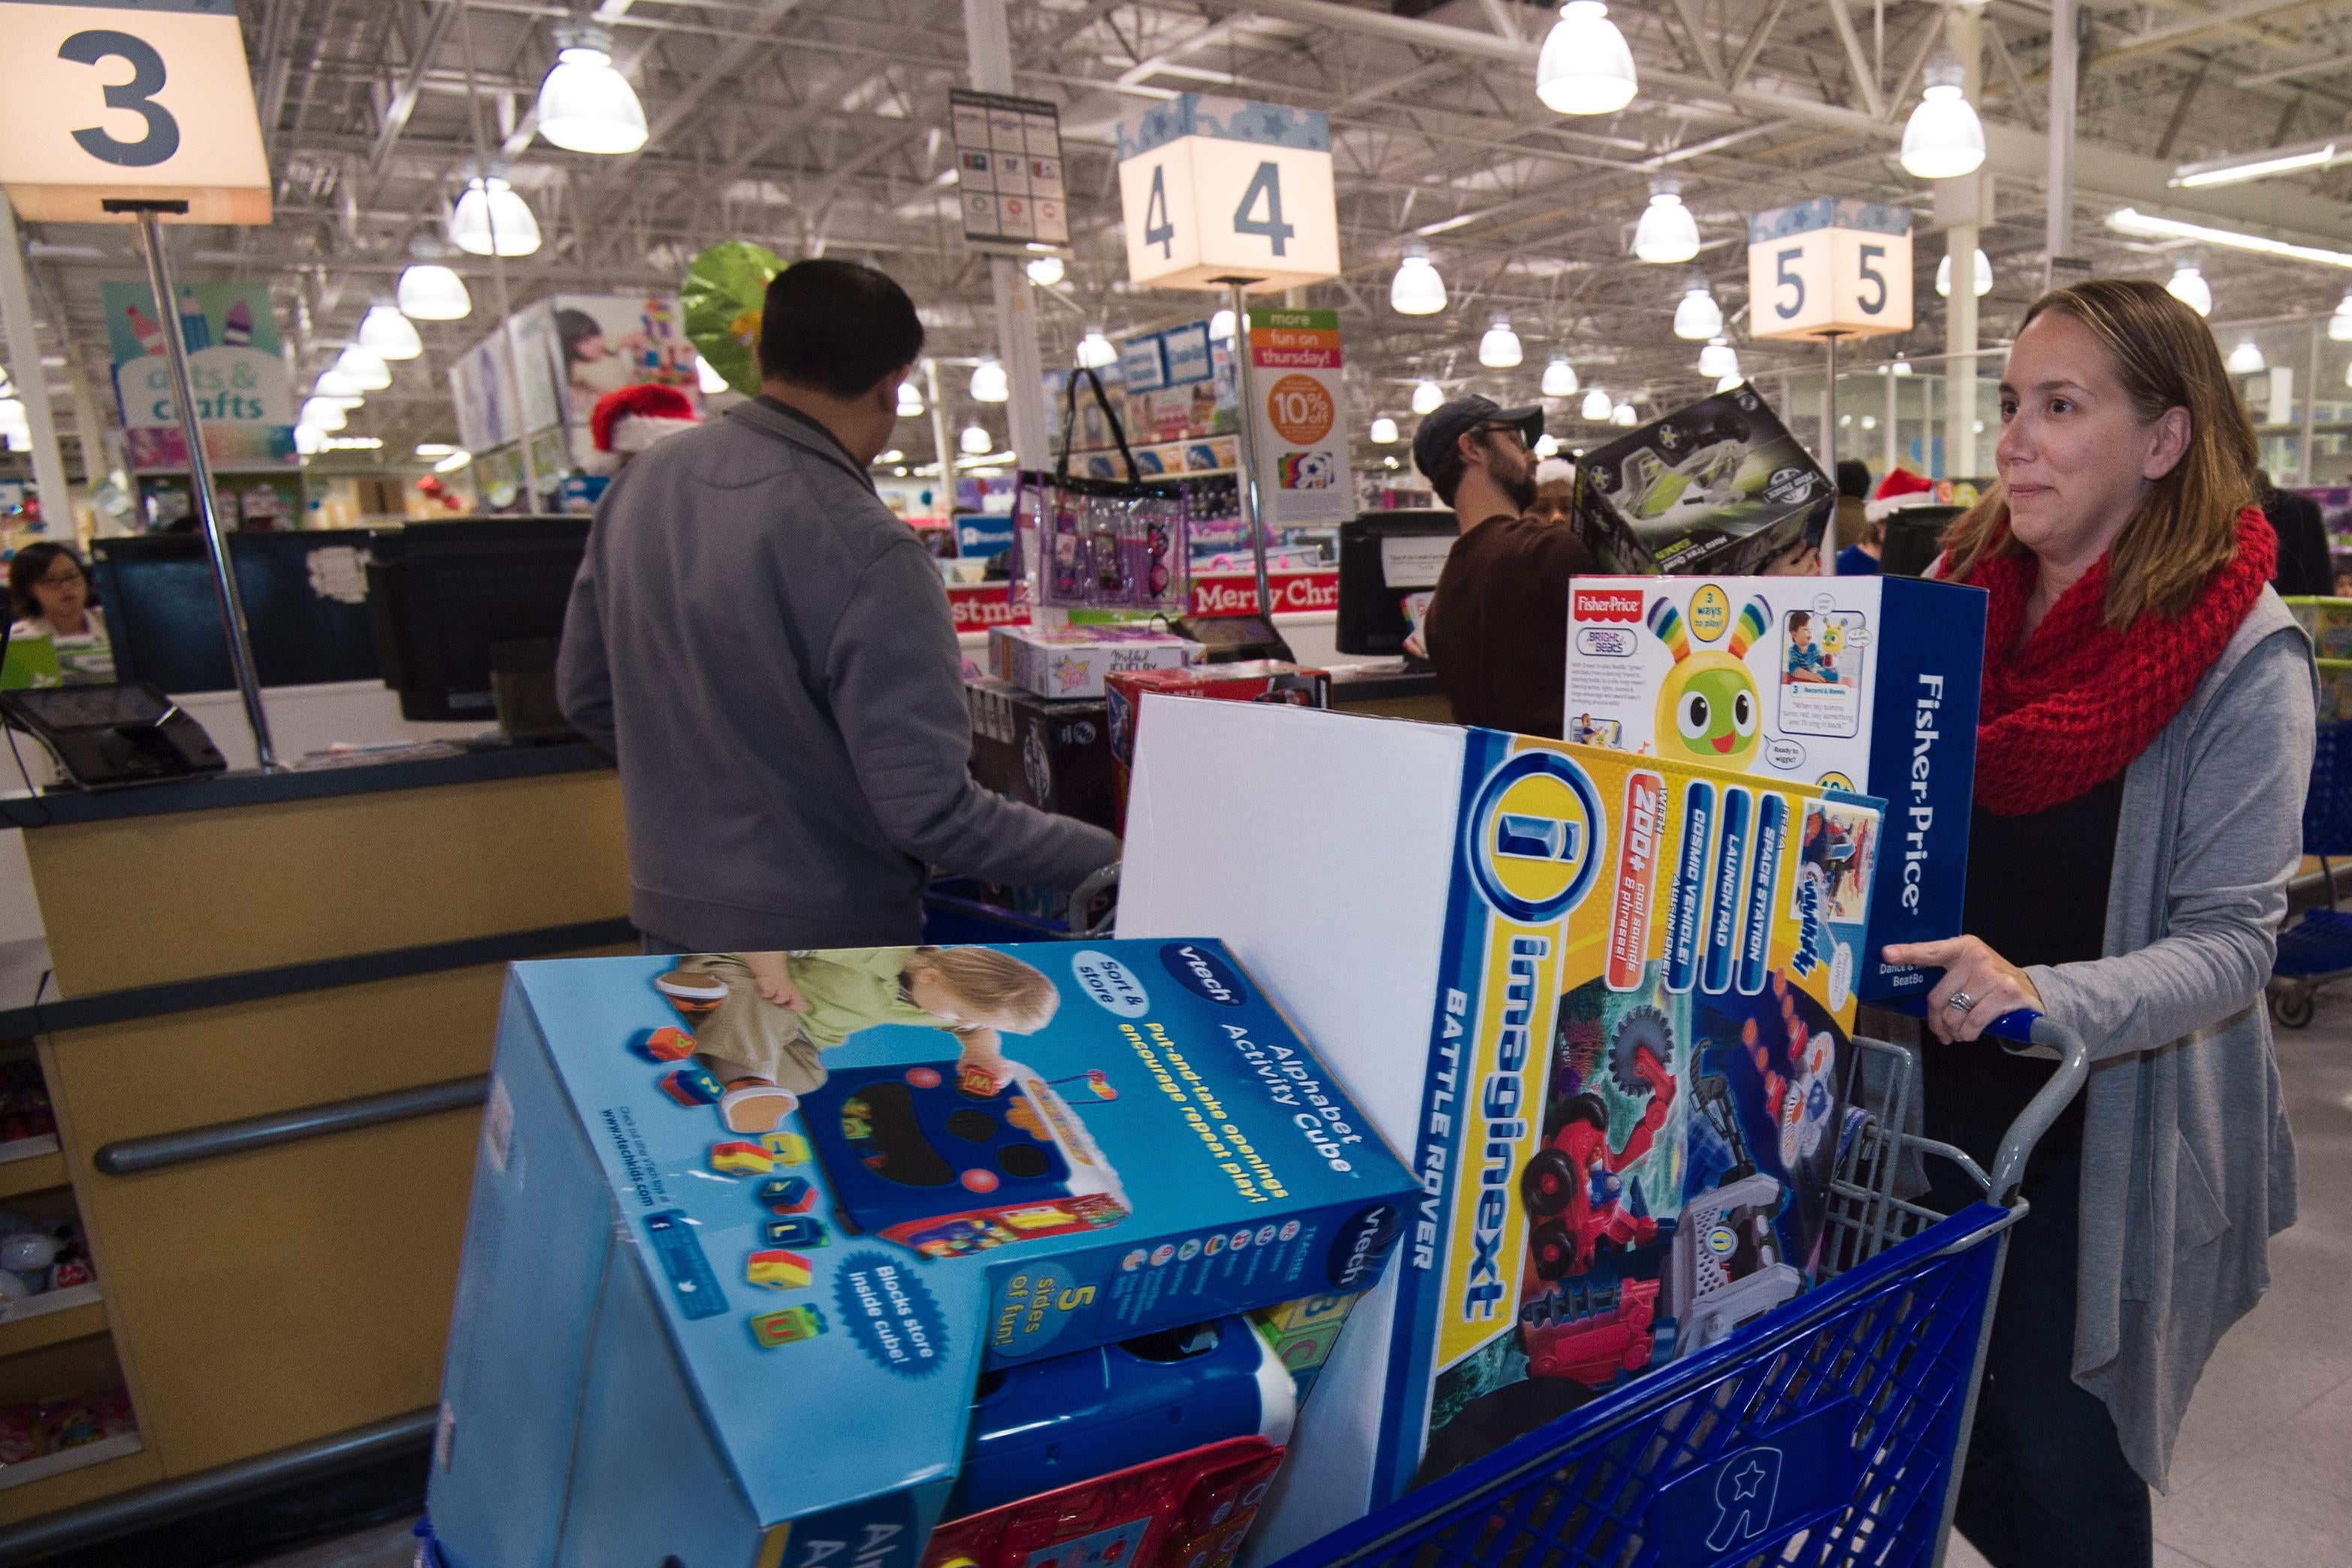 A woman pushes her cart full of toys at  a Toys-R-Us store, in Fairfax, Virginia  November 26, 2015, on a Black Friday sale that extended a day earlier into Thanksgiving evening. The  US holiday shopping season kicks off with 'Black Friday' -- the day after the Thanksgiving holiday -- with a frenzy expected at stores around the country as retailers slash prices.         AFP PHOTO/PAUL J. RICHARDS / AFP / PAUL J. RICHARDS        (Photo credit should read PAUL J. RICHARDS/AFP/Getty Images)